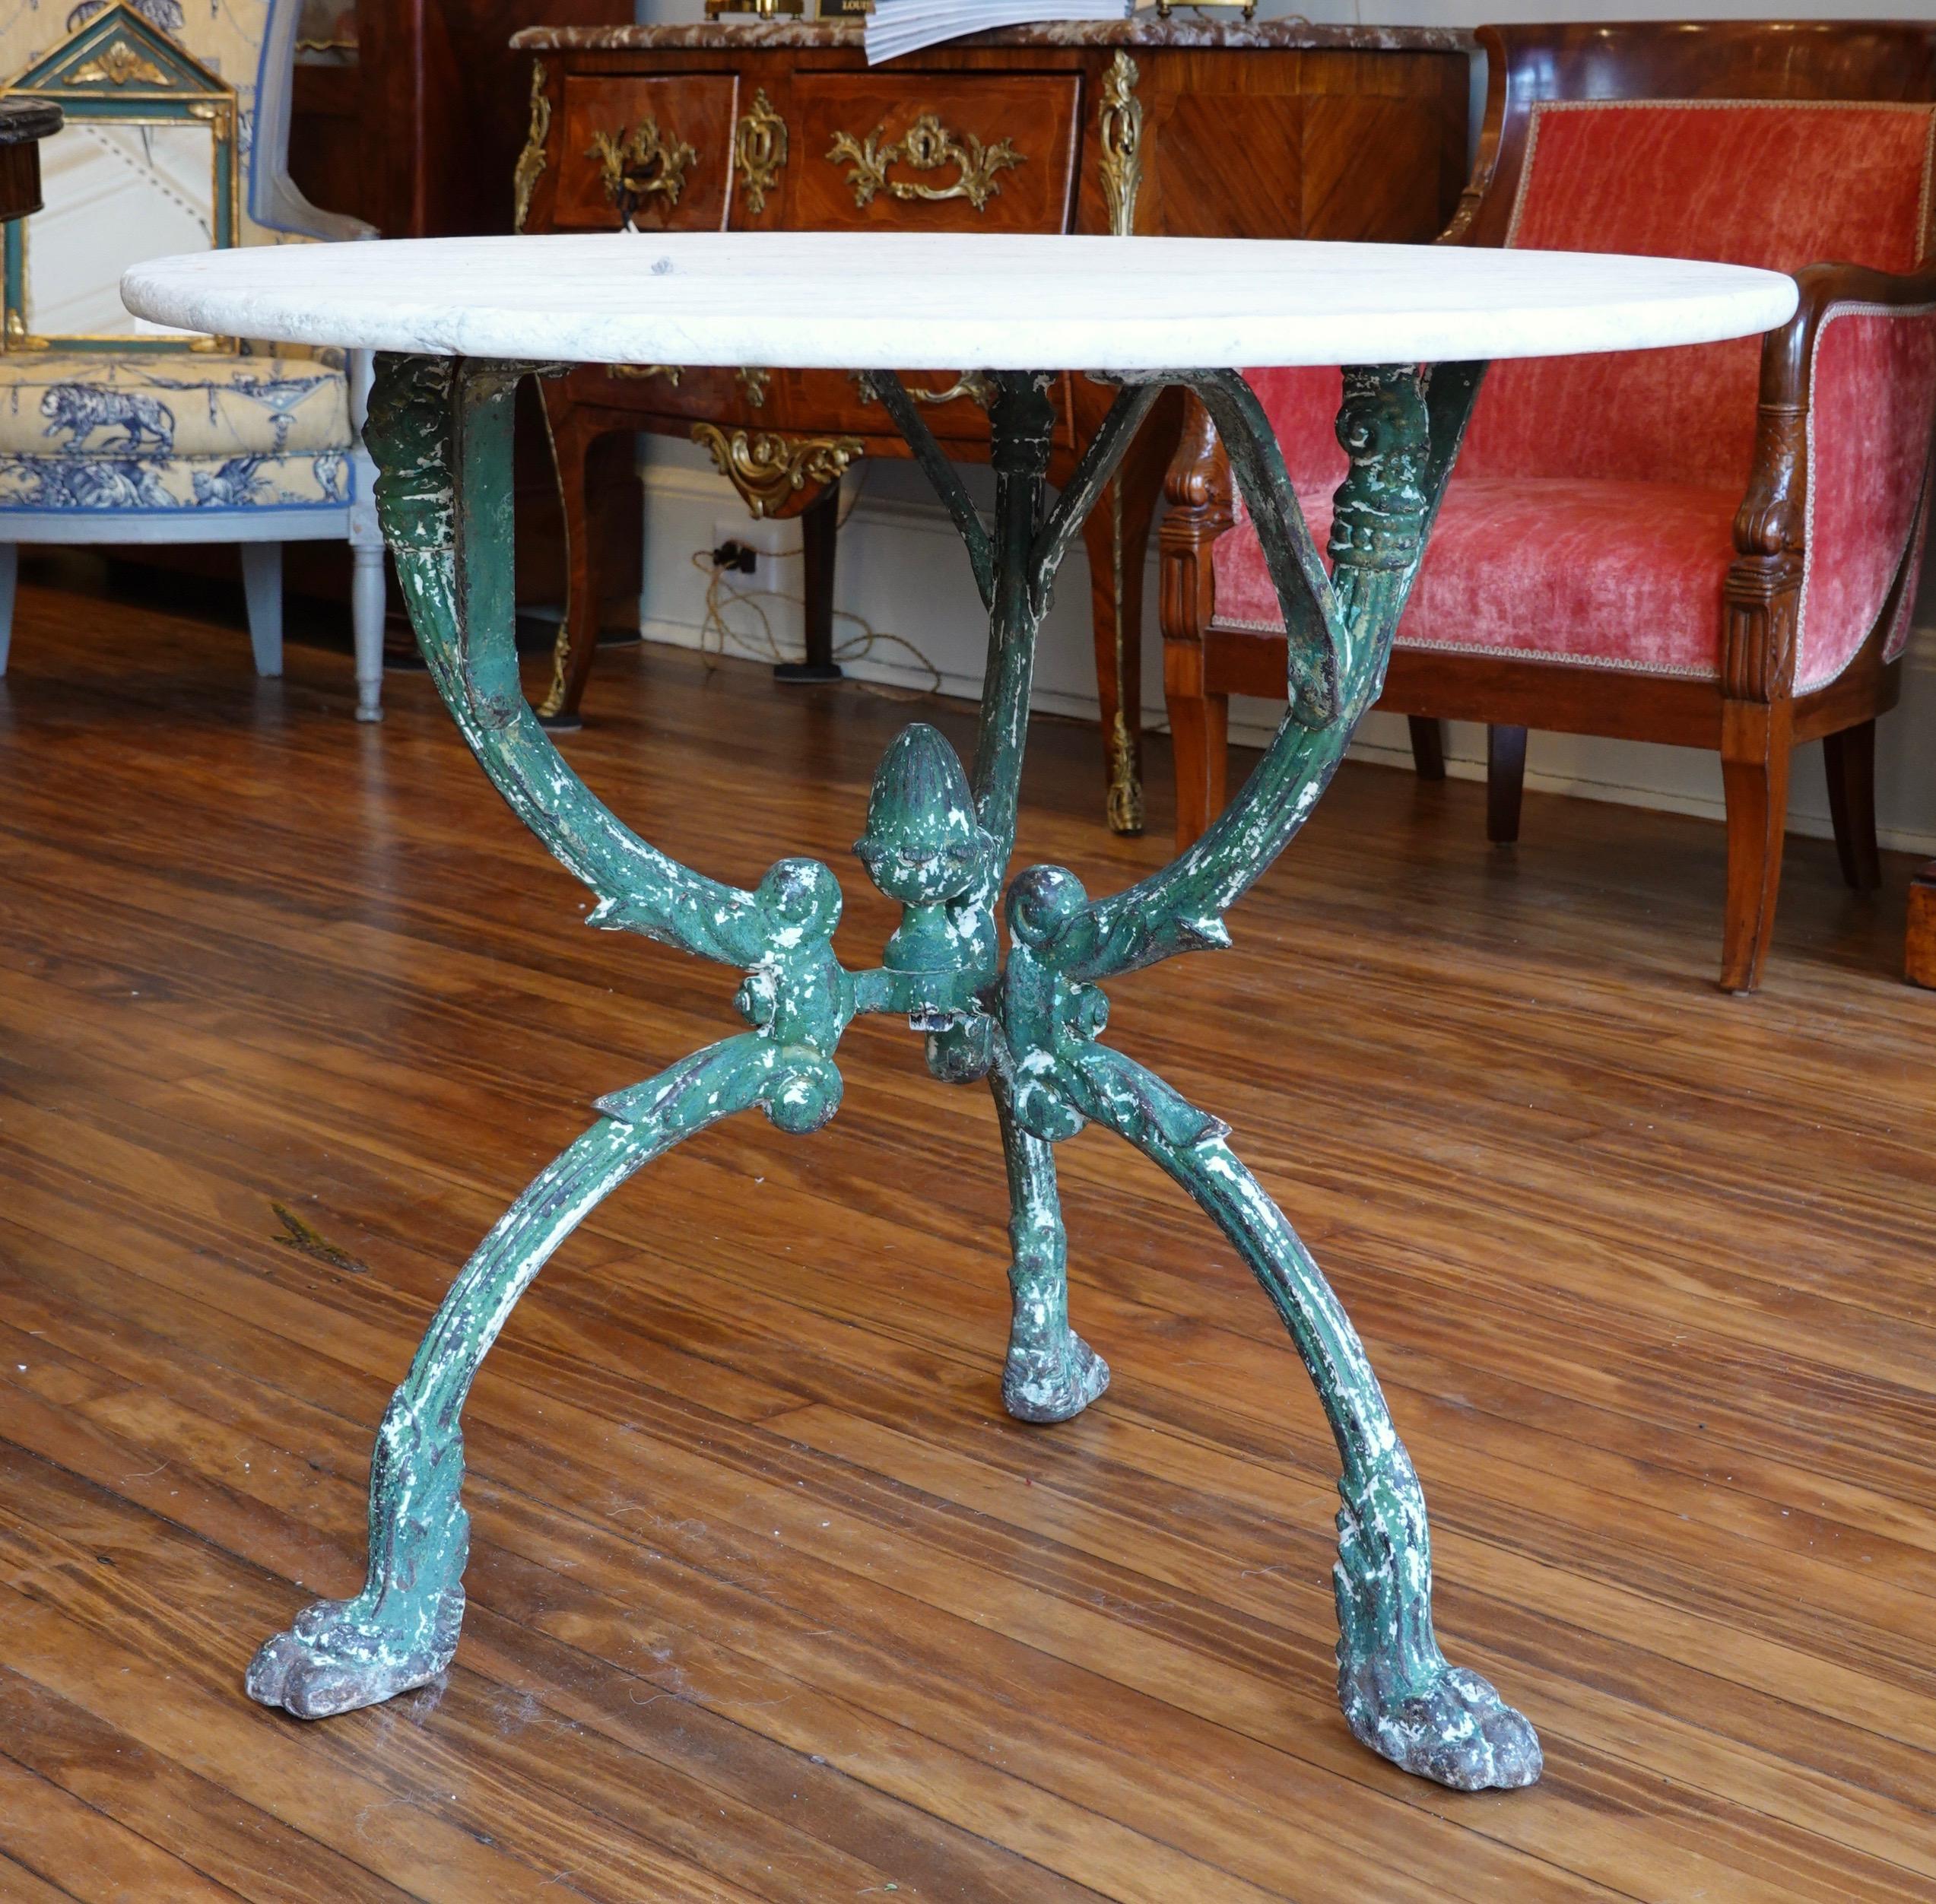 This French cast iron garden table has an old green painted finish and features a highly decorate tripod base with paw feet, an acorn finial, and the top of each leg terminating with a caryatid's head. The white Carrera marble top with grey veining